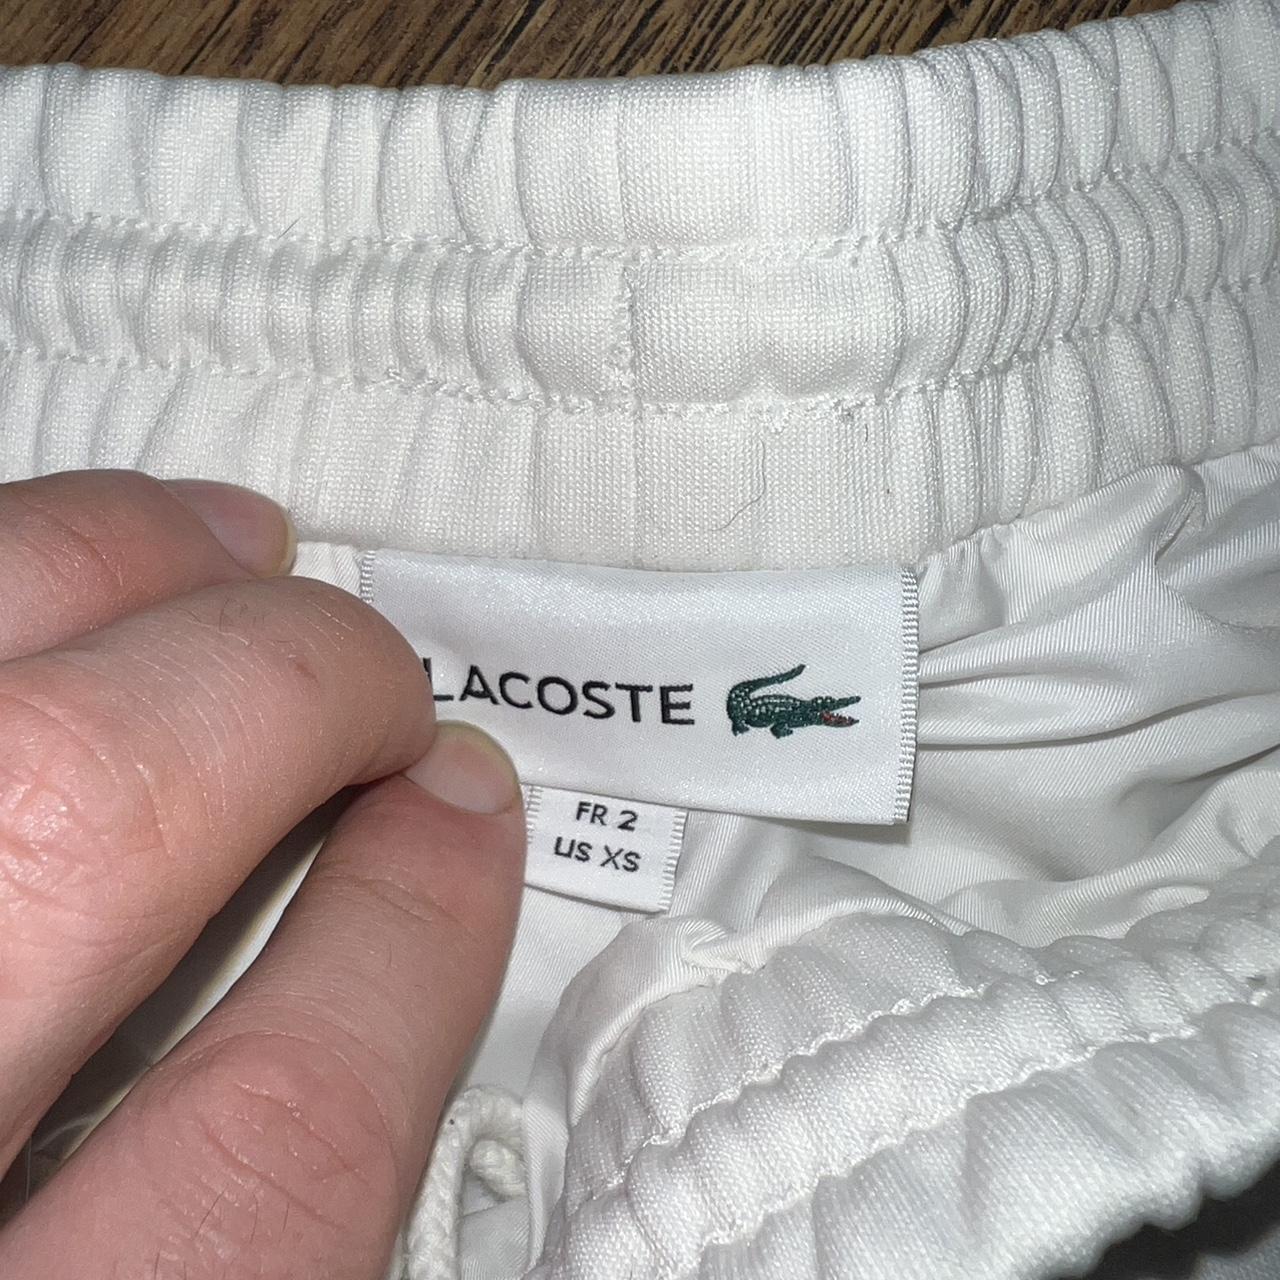 LACOSTE TRACKSUIT BOTTOMS WHITE AND GREEN #lacoste... - Depop